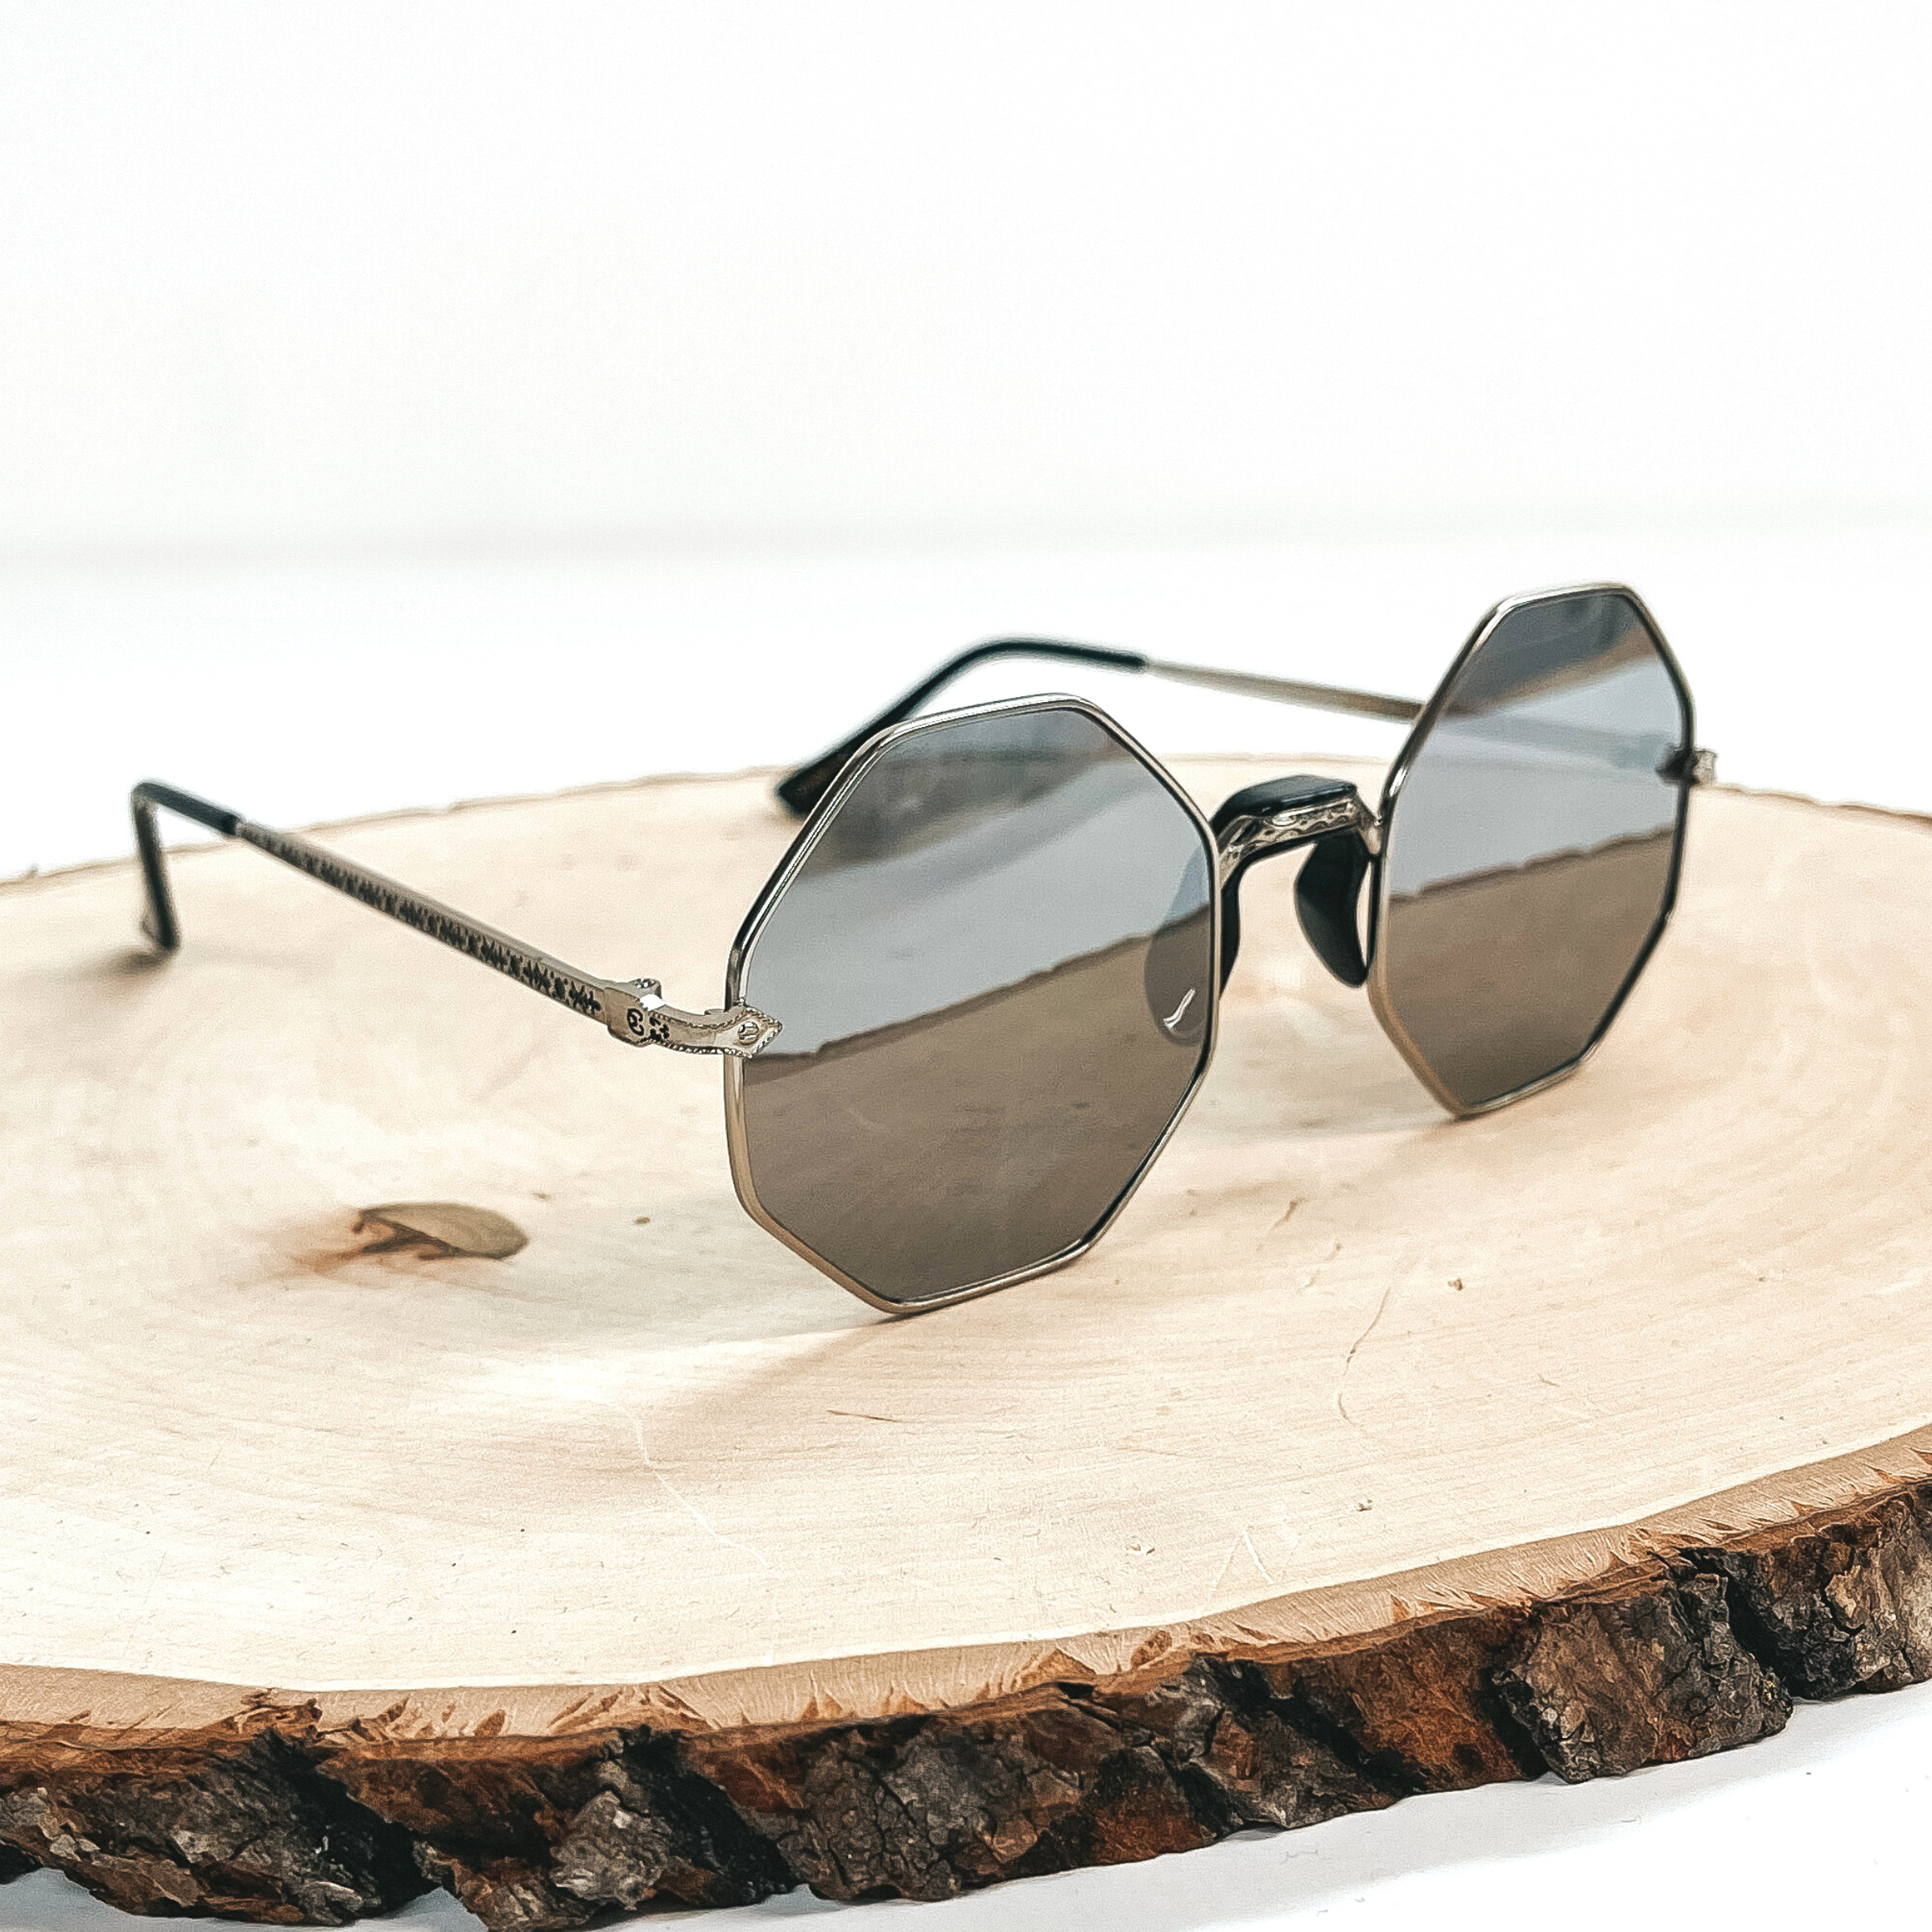 This is a pair of silver octagon sunglasses, the lense is silver/grey with a  silver outline and a black nose piece. These pair of sunglasses are taken on a wooden slate and on a white  background.